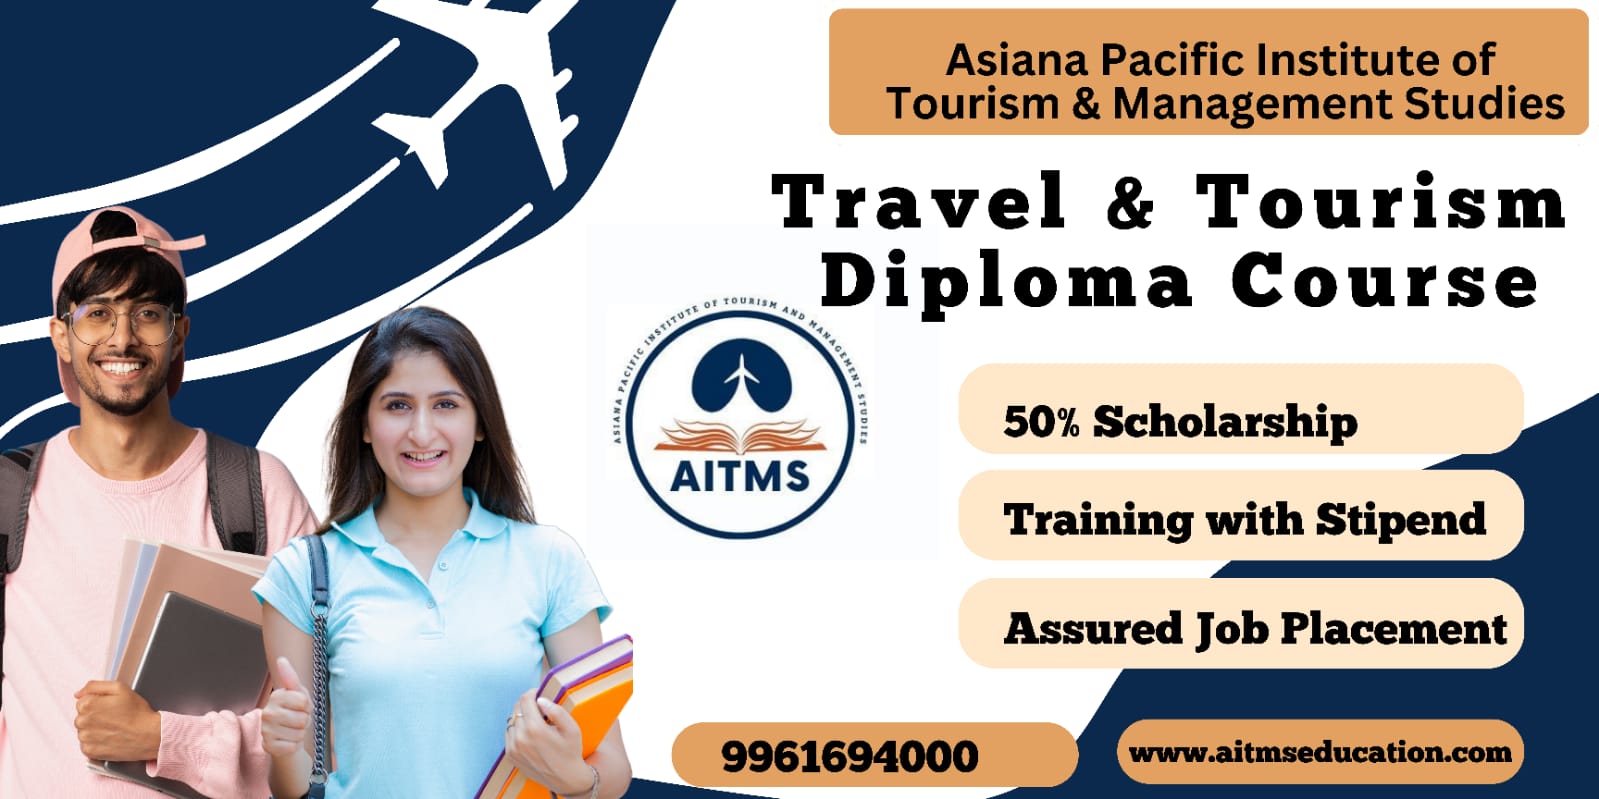 Travel & Tourism Diploma Course: Study and Work with a Scholarship at AITMS